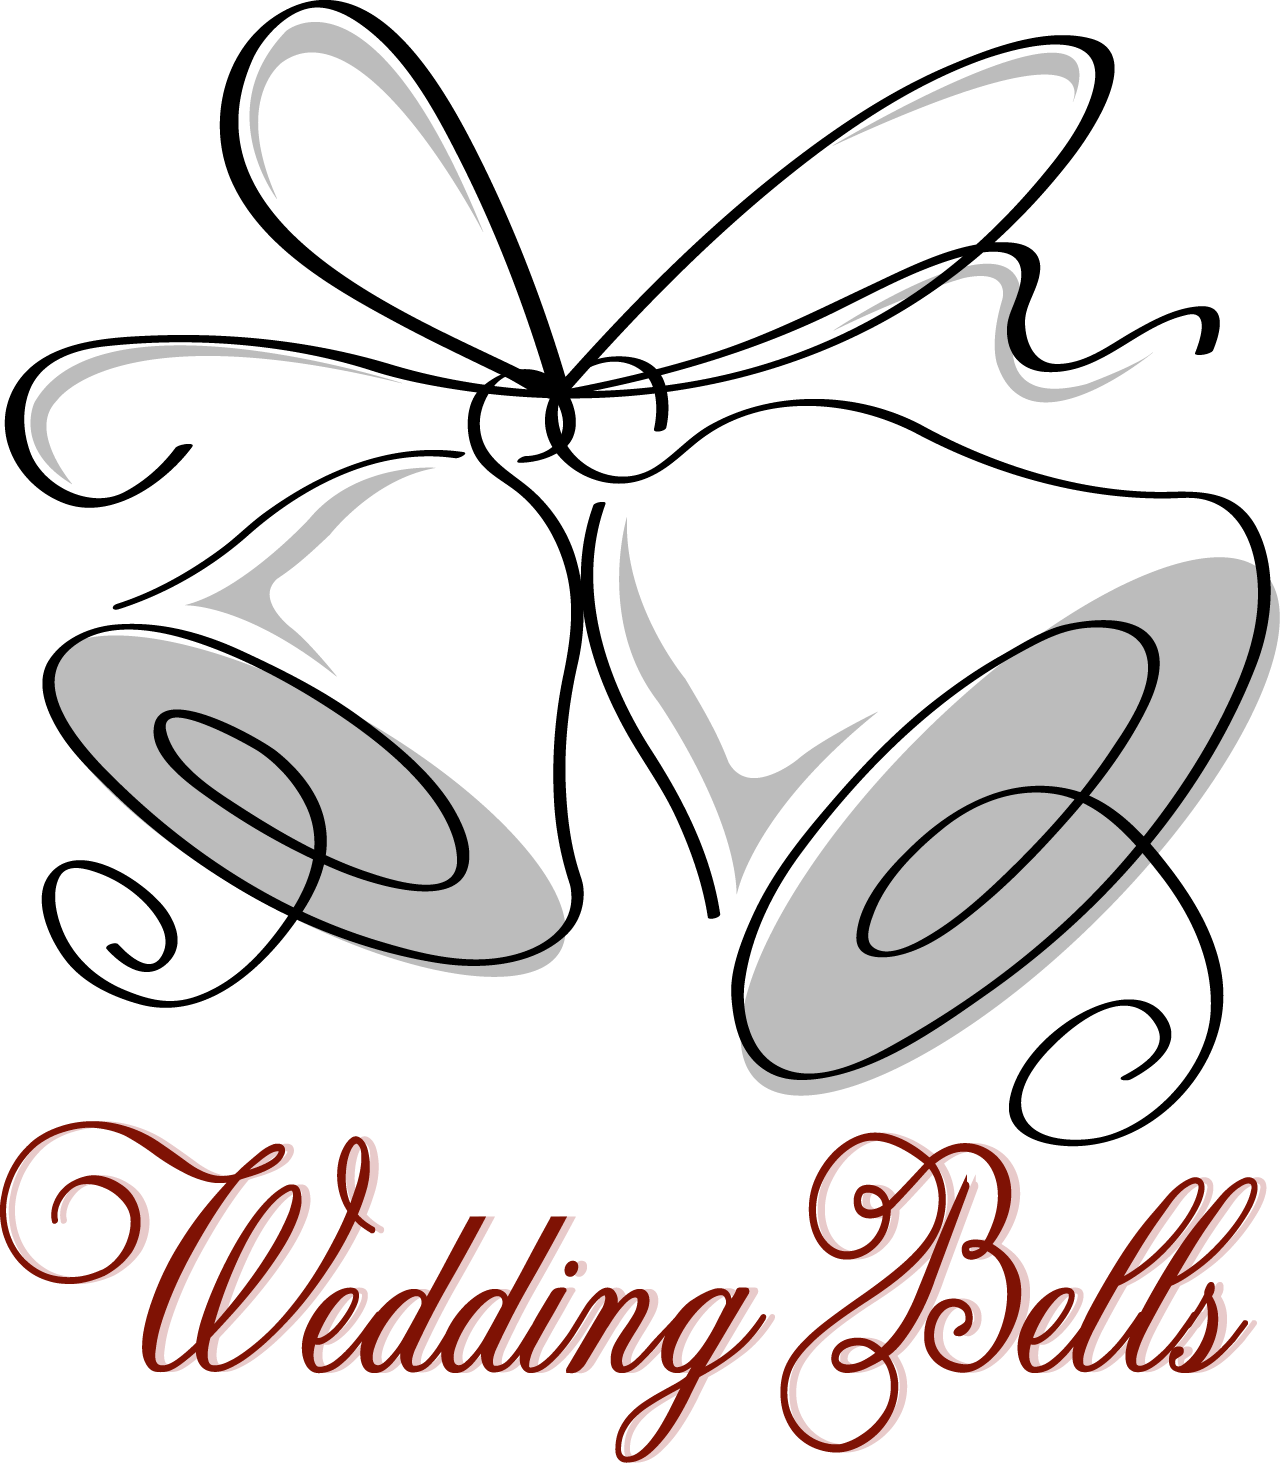 Black And White Wedding Bells Clip Art Wedding Images In Line Clip Art Library